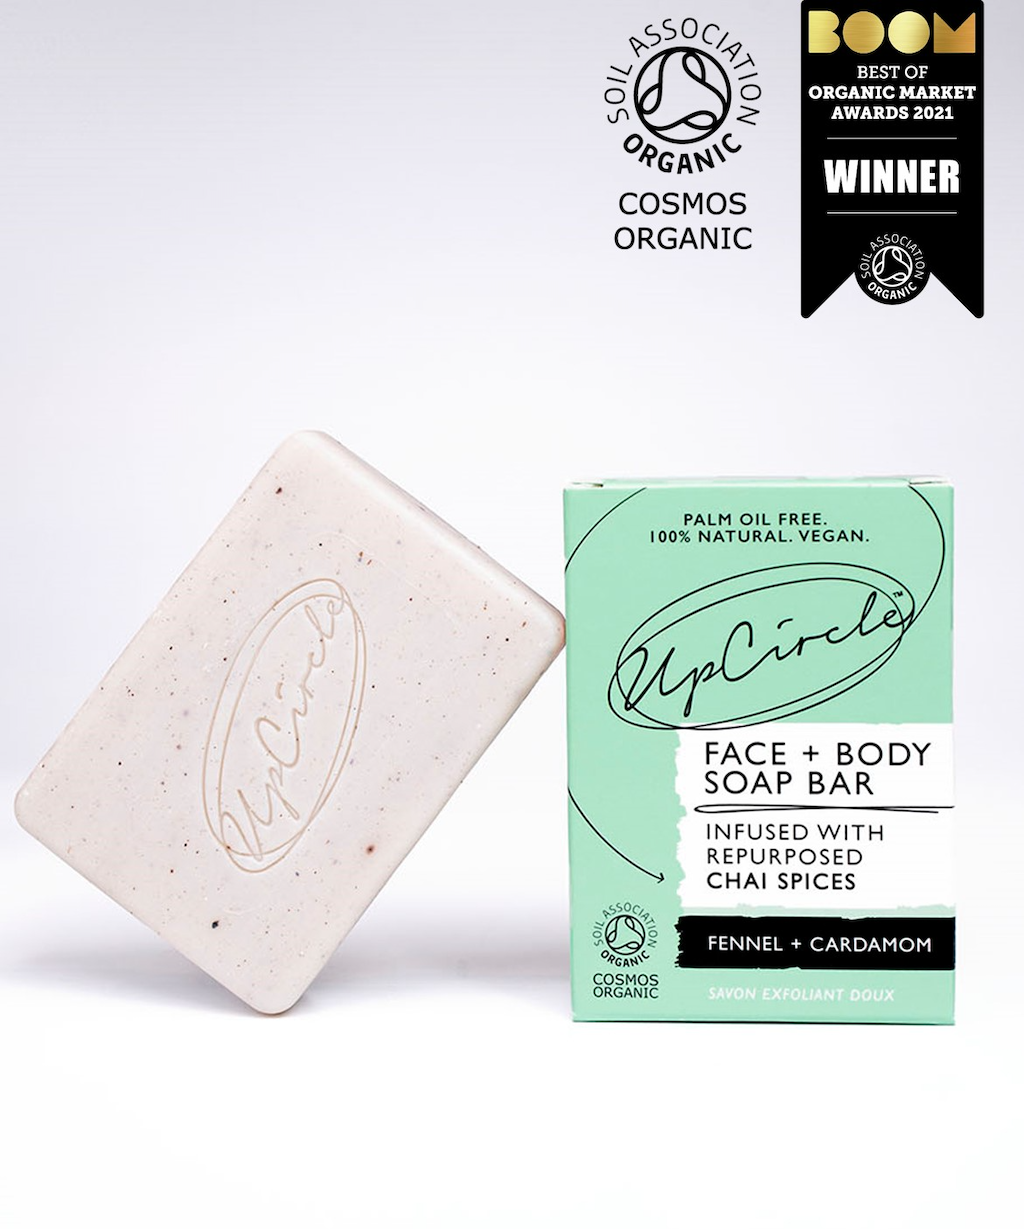 UpCircle Fennel and Cardamom Soap Bar. Natural soap bar. The pale coloured soap bar is sitting next to its green branded box. A Boom award is photo collaged on the image.